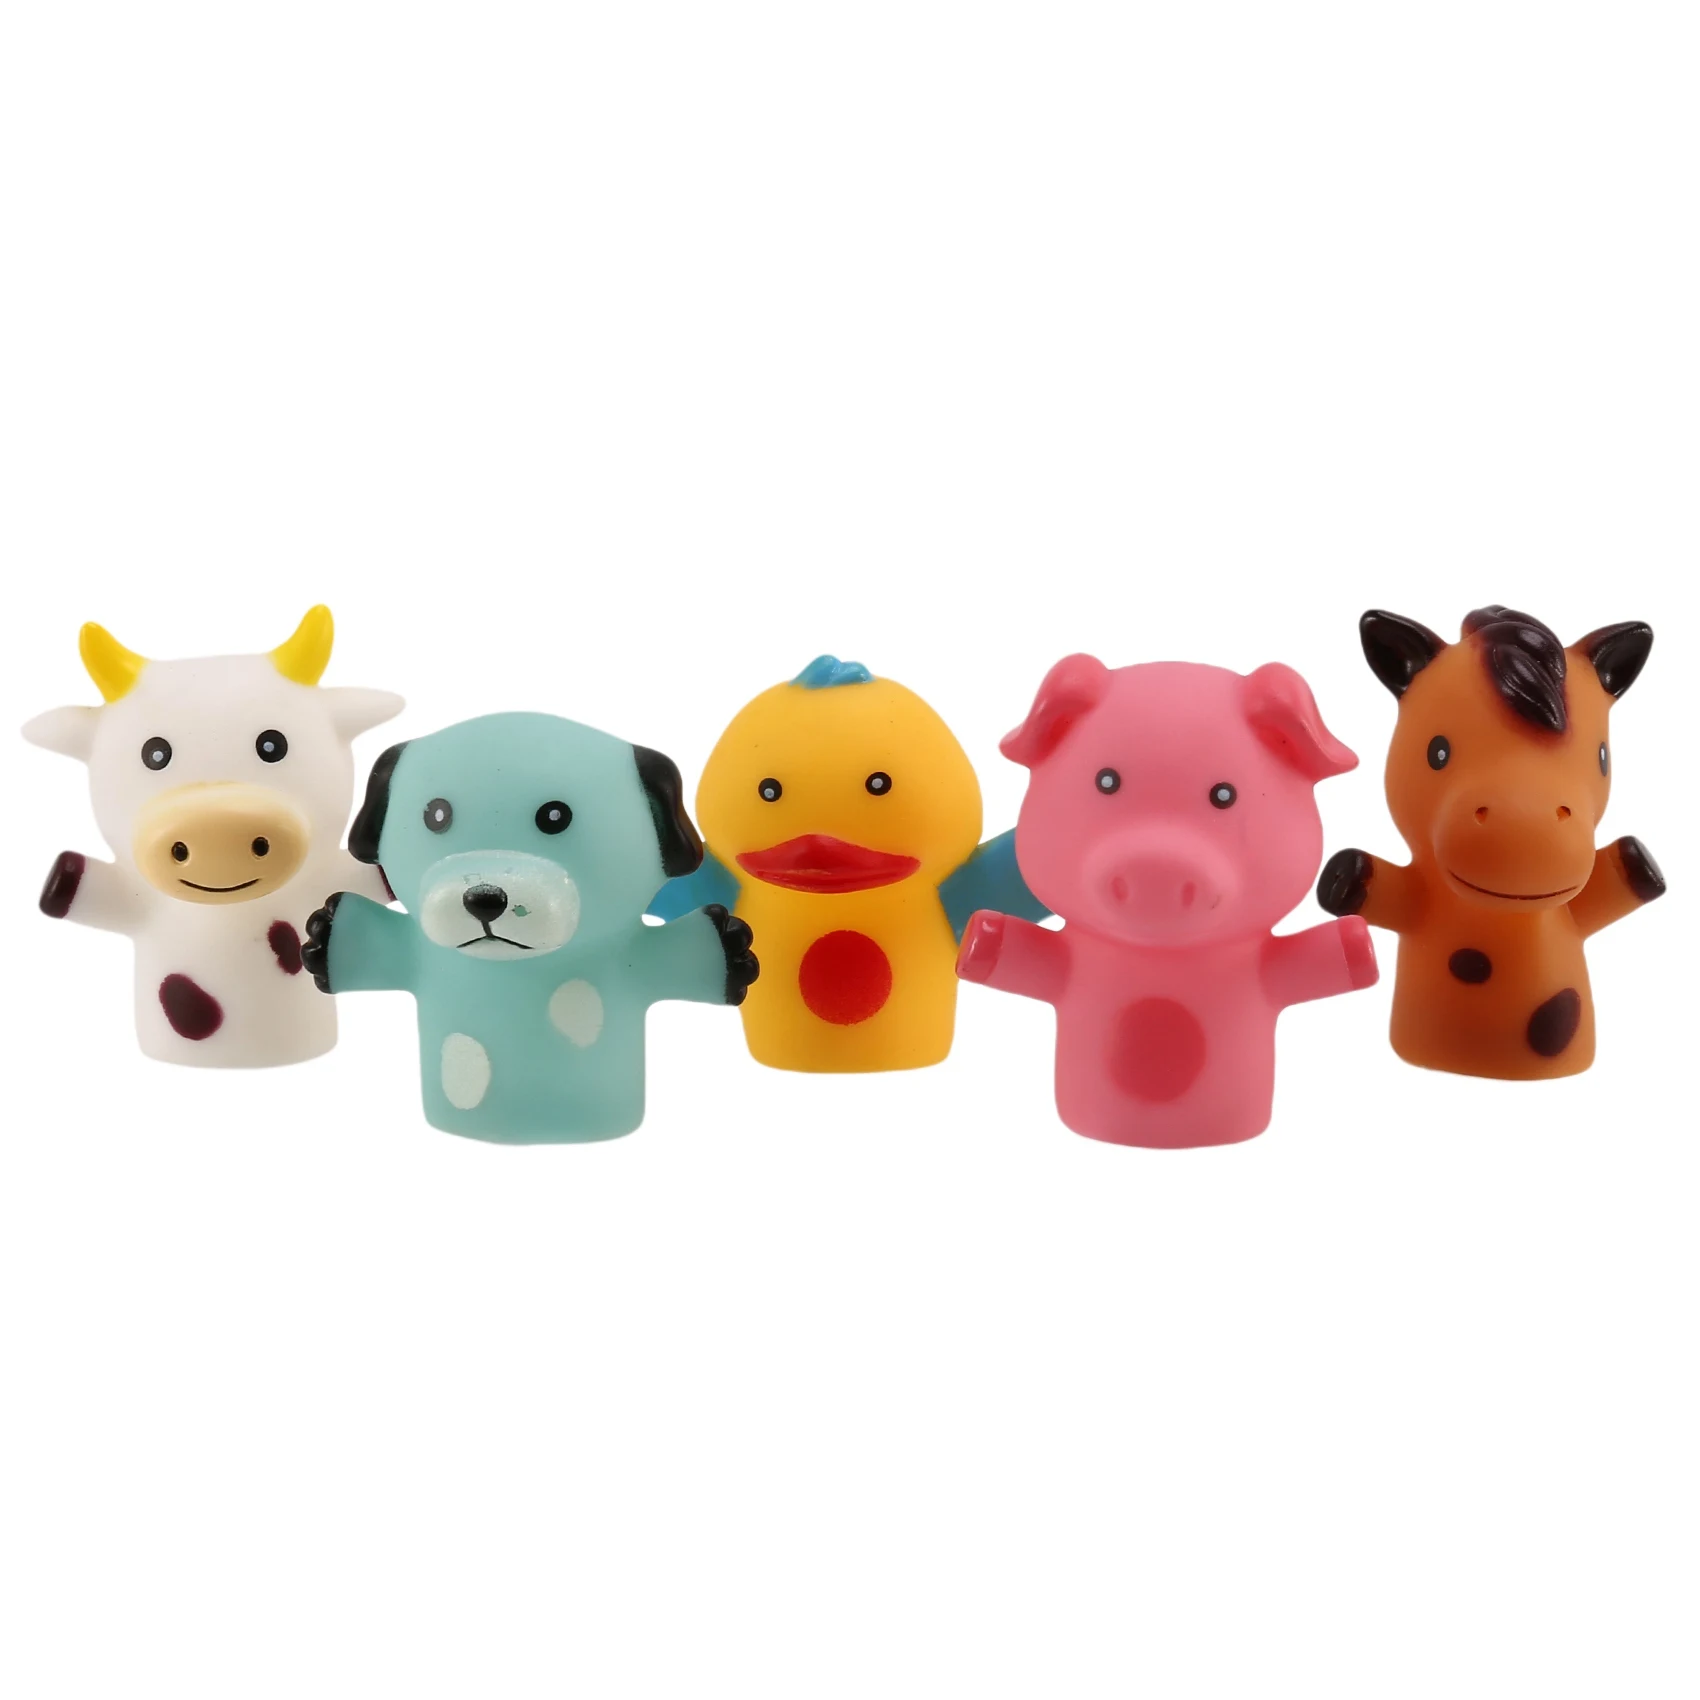 

Finger Puppets for Children and Babies 5 Farm Animals BPA PVC Bath Toys Hand Puppets Doll Set Early Eductional Toys(C)